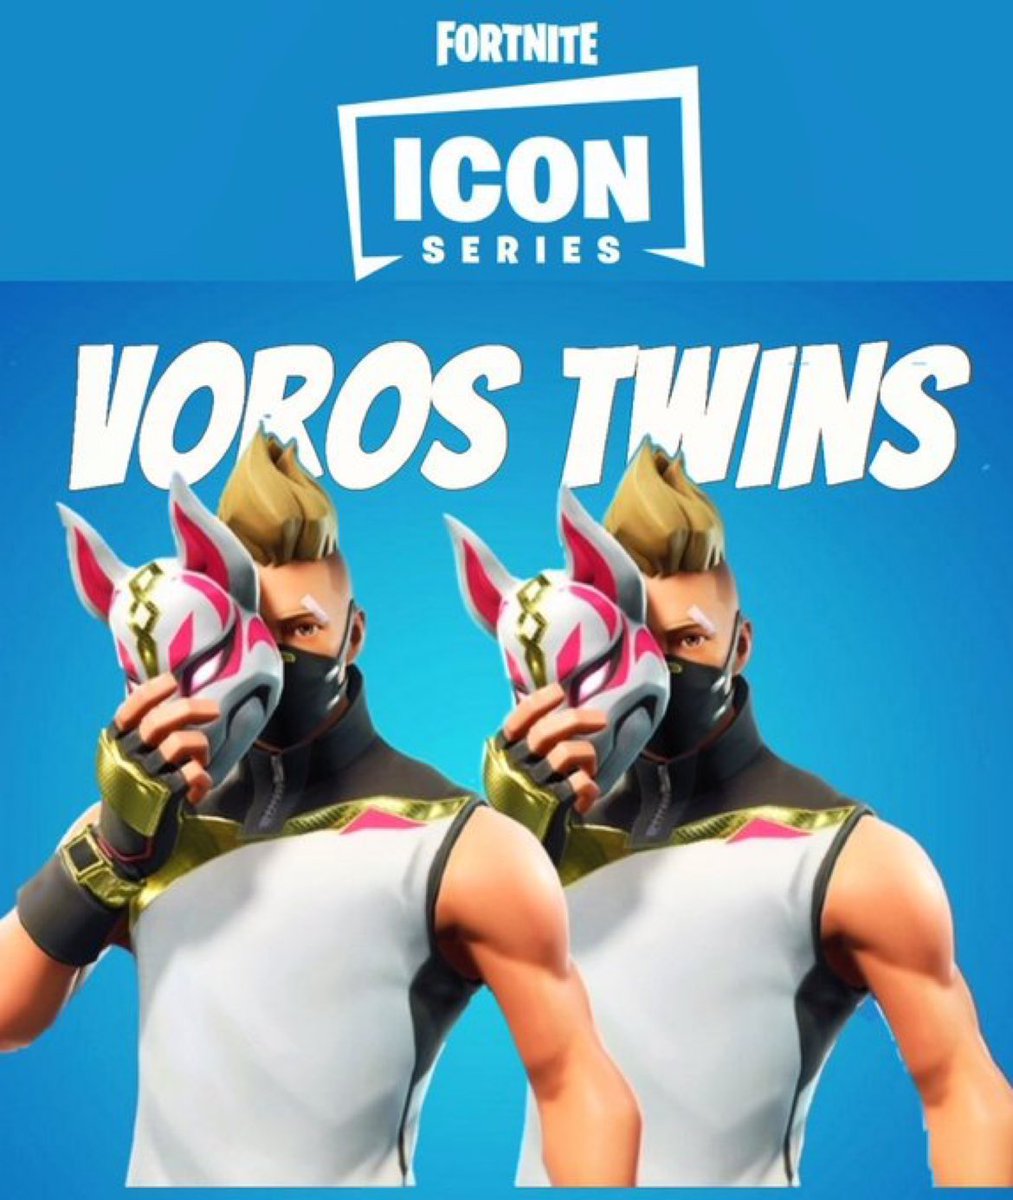 WE GOT OUR OWN FORTNITE SKIN!!!! Live now! 📎 twitch.tv/vorostwins